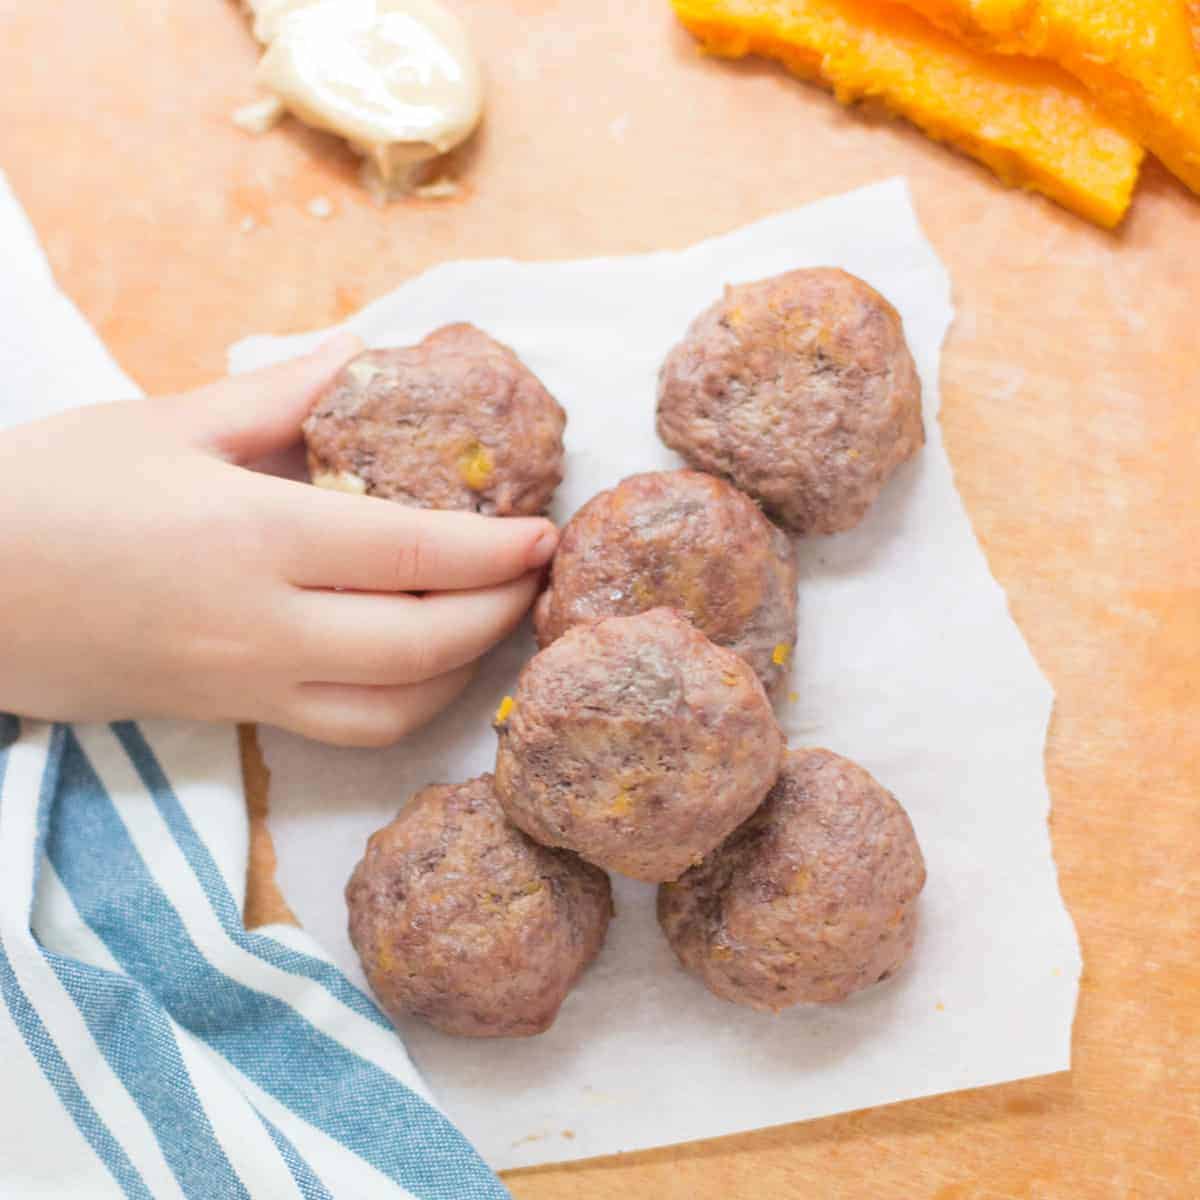 a close up shot of 6 baby meatballs on a wooden board with toddler's hand grabbing one